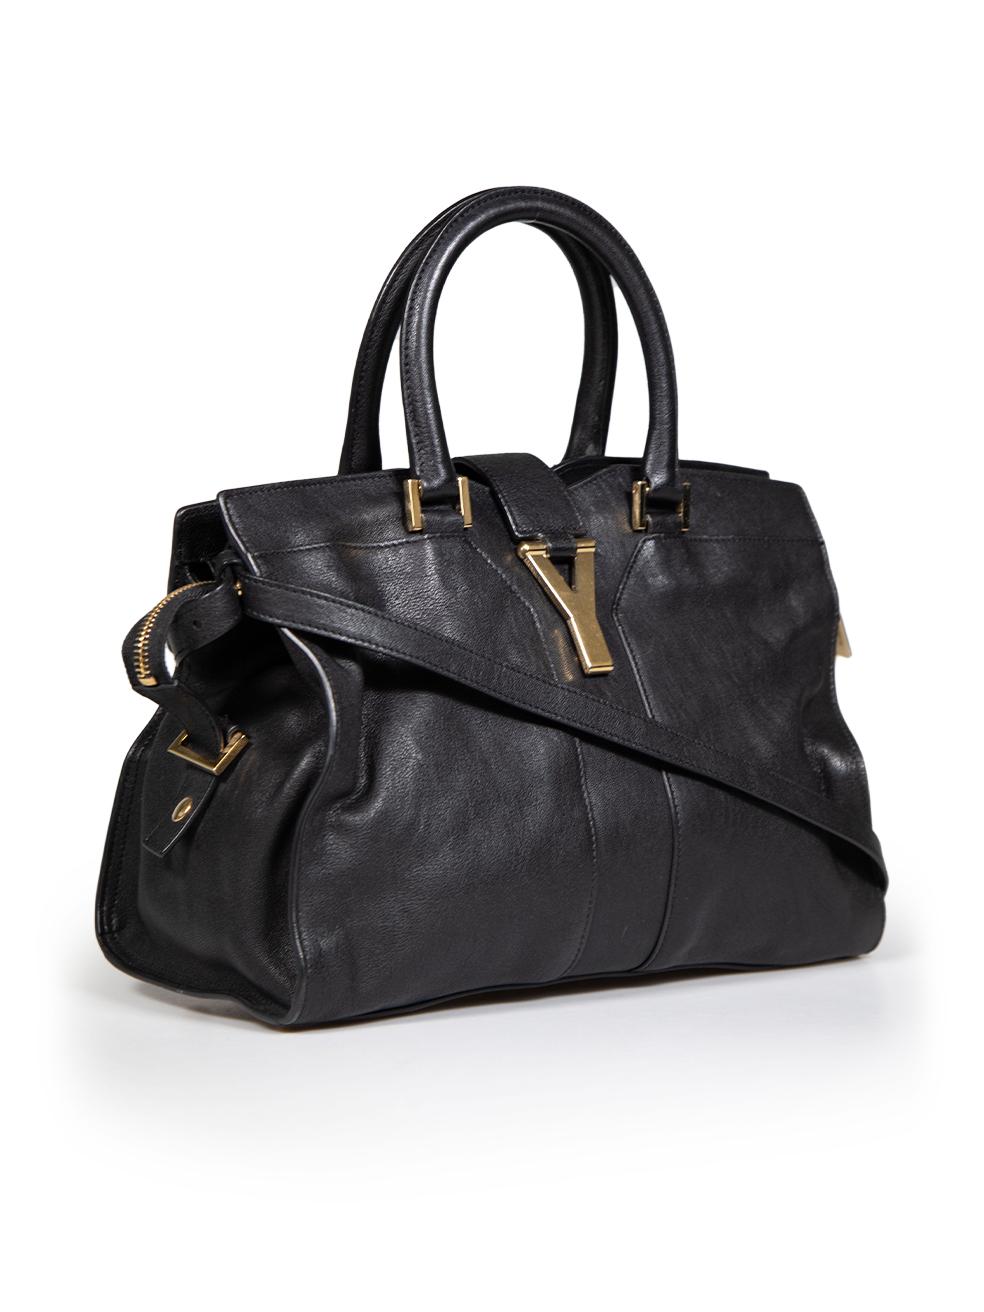 CONDITION is Very good. Minimal wear to the bag is evident. Minimal wear to the inside of the top handle and on the bottom edges is seen with abrasion marks and on this used Yves Saint Laurent designer resale item. This item comes with an original